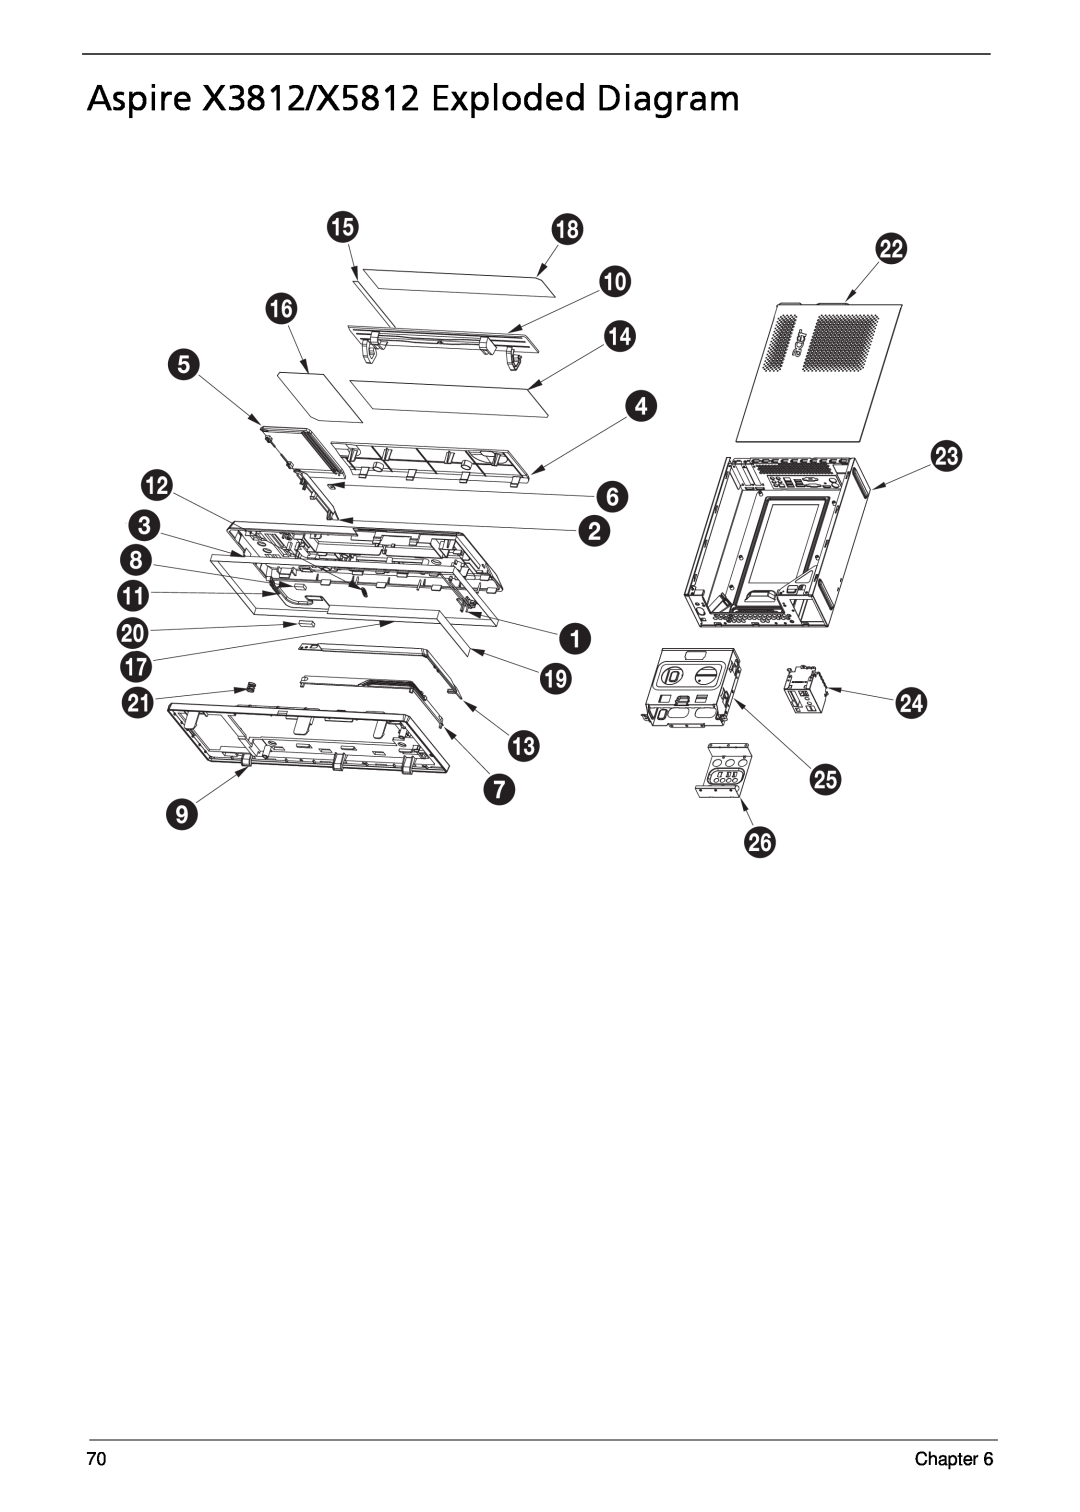 Acer manual Aspire X3812/X5812 Exploded Diagram, Chapter 